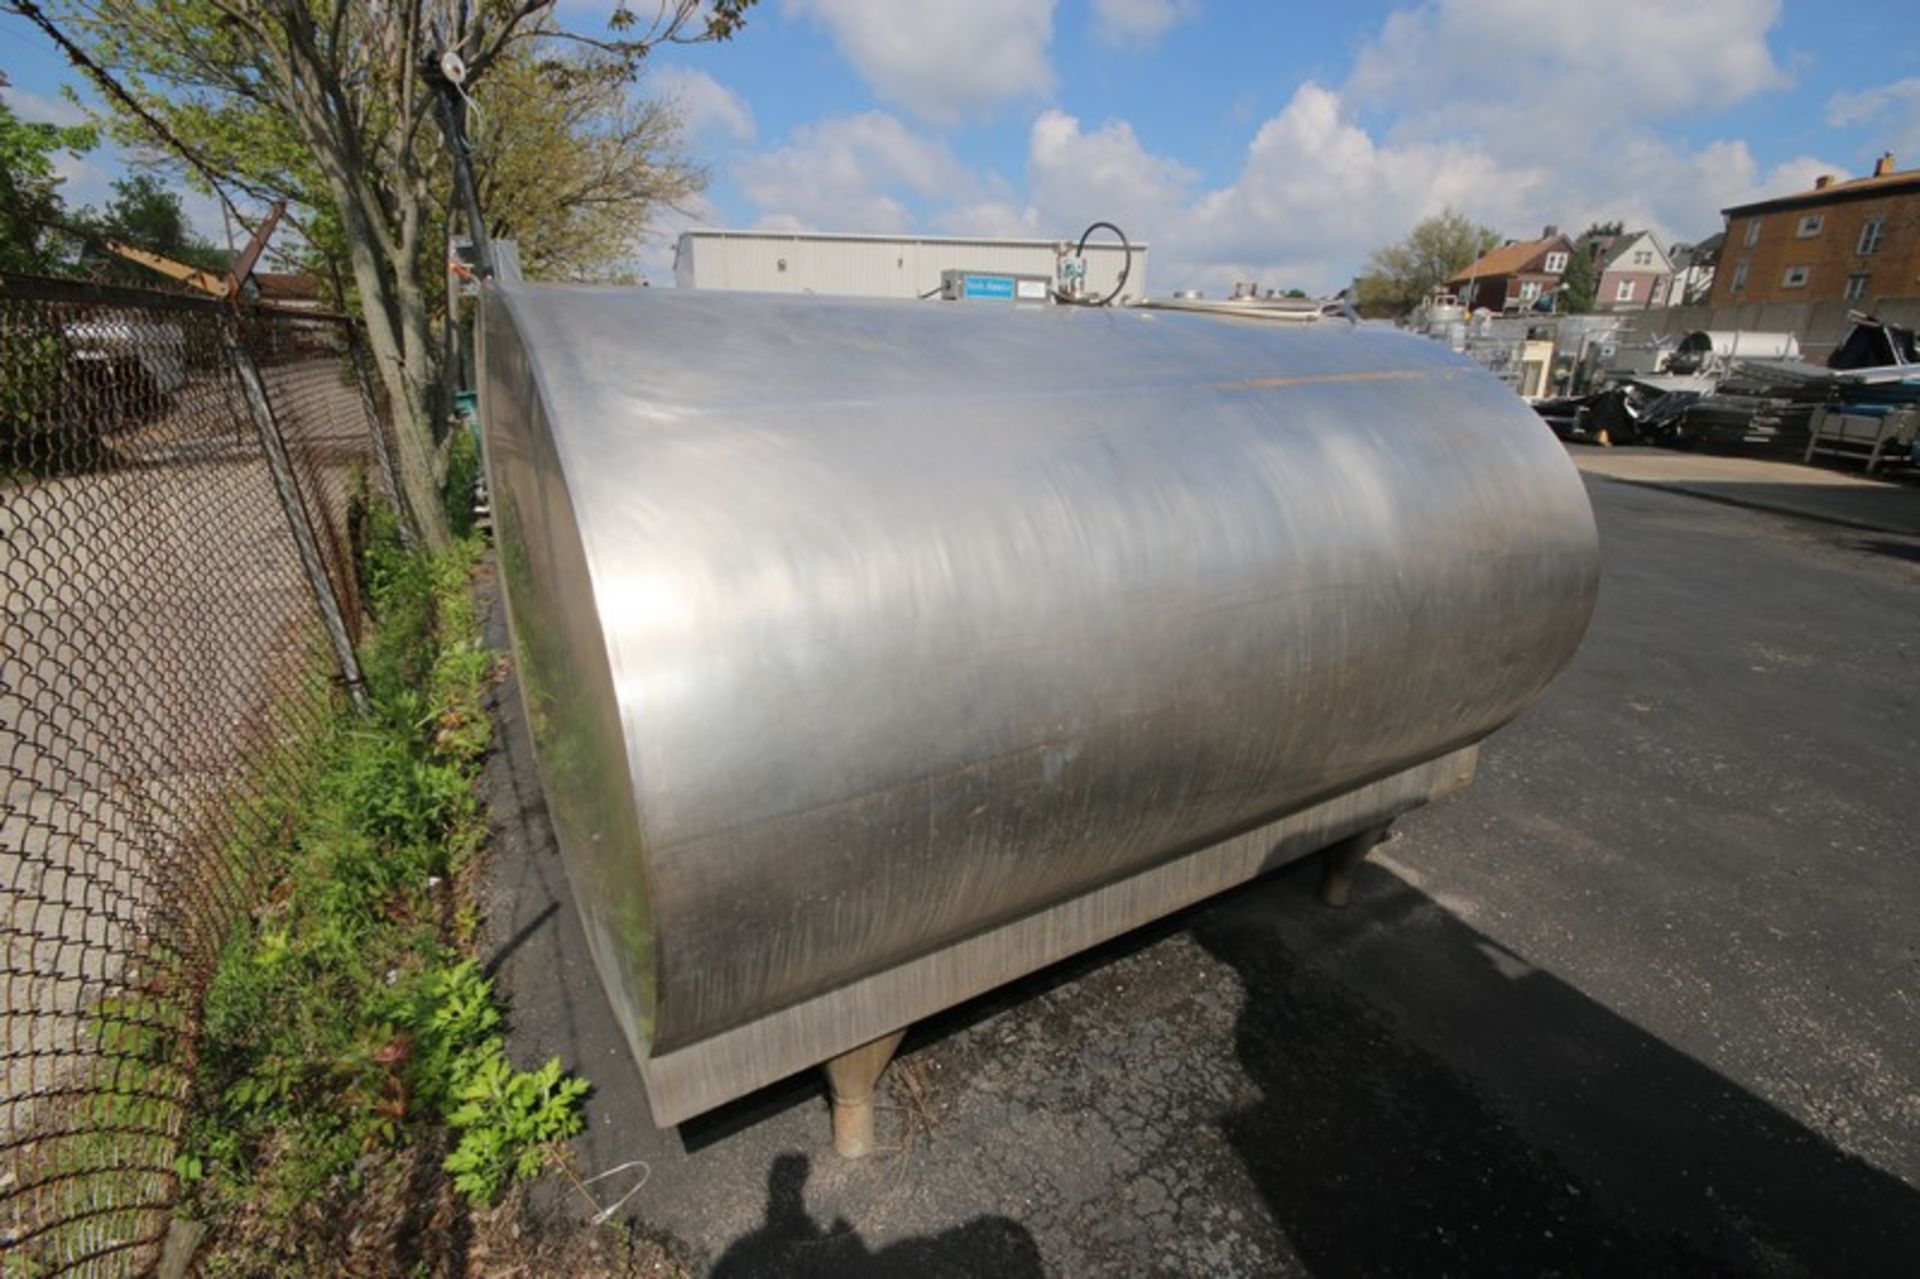 Mueller Aprox. 500 Gal. S/S CIP Oval Tank, Freon Jacketed with Top Man Door, with Tank Master - Image 6 of 7